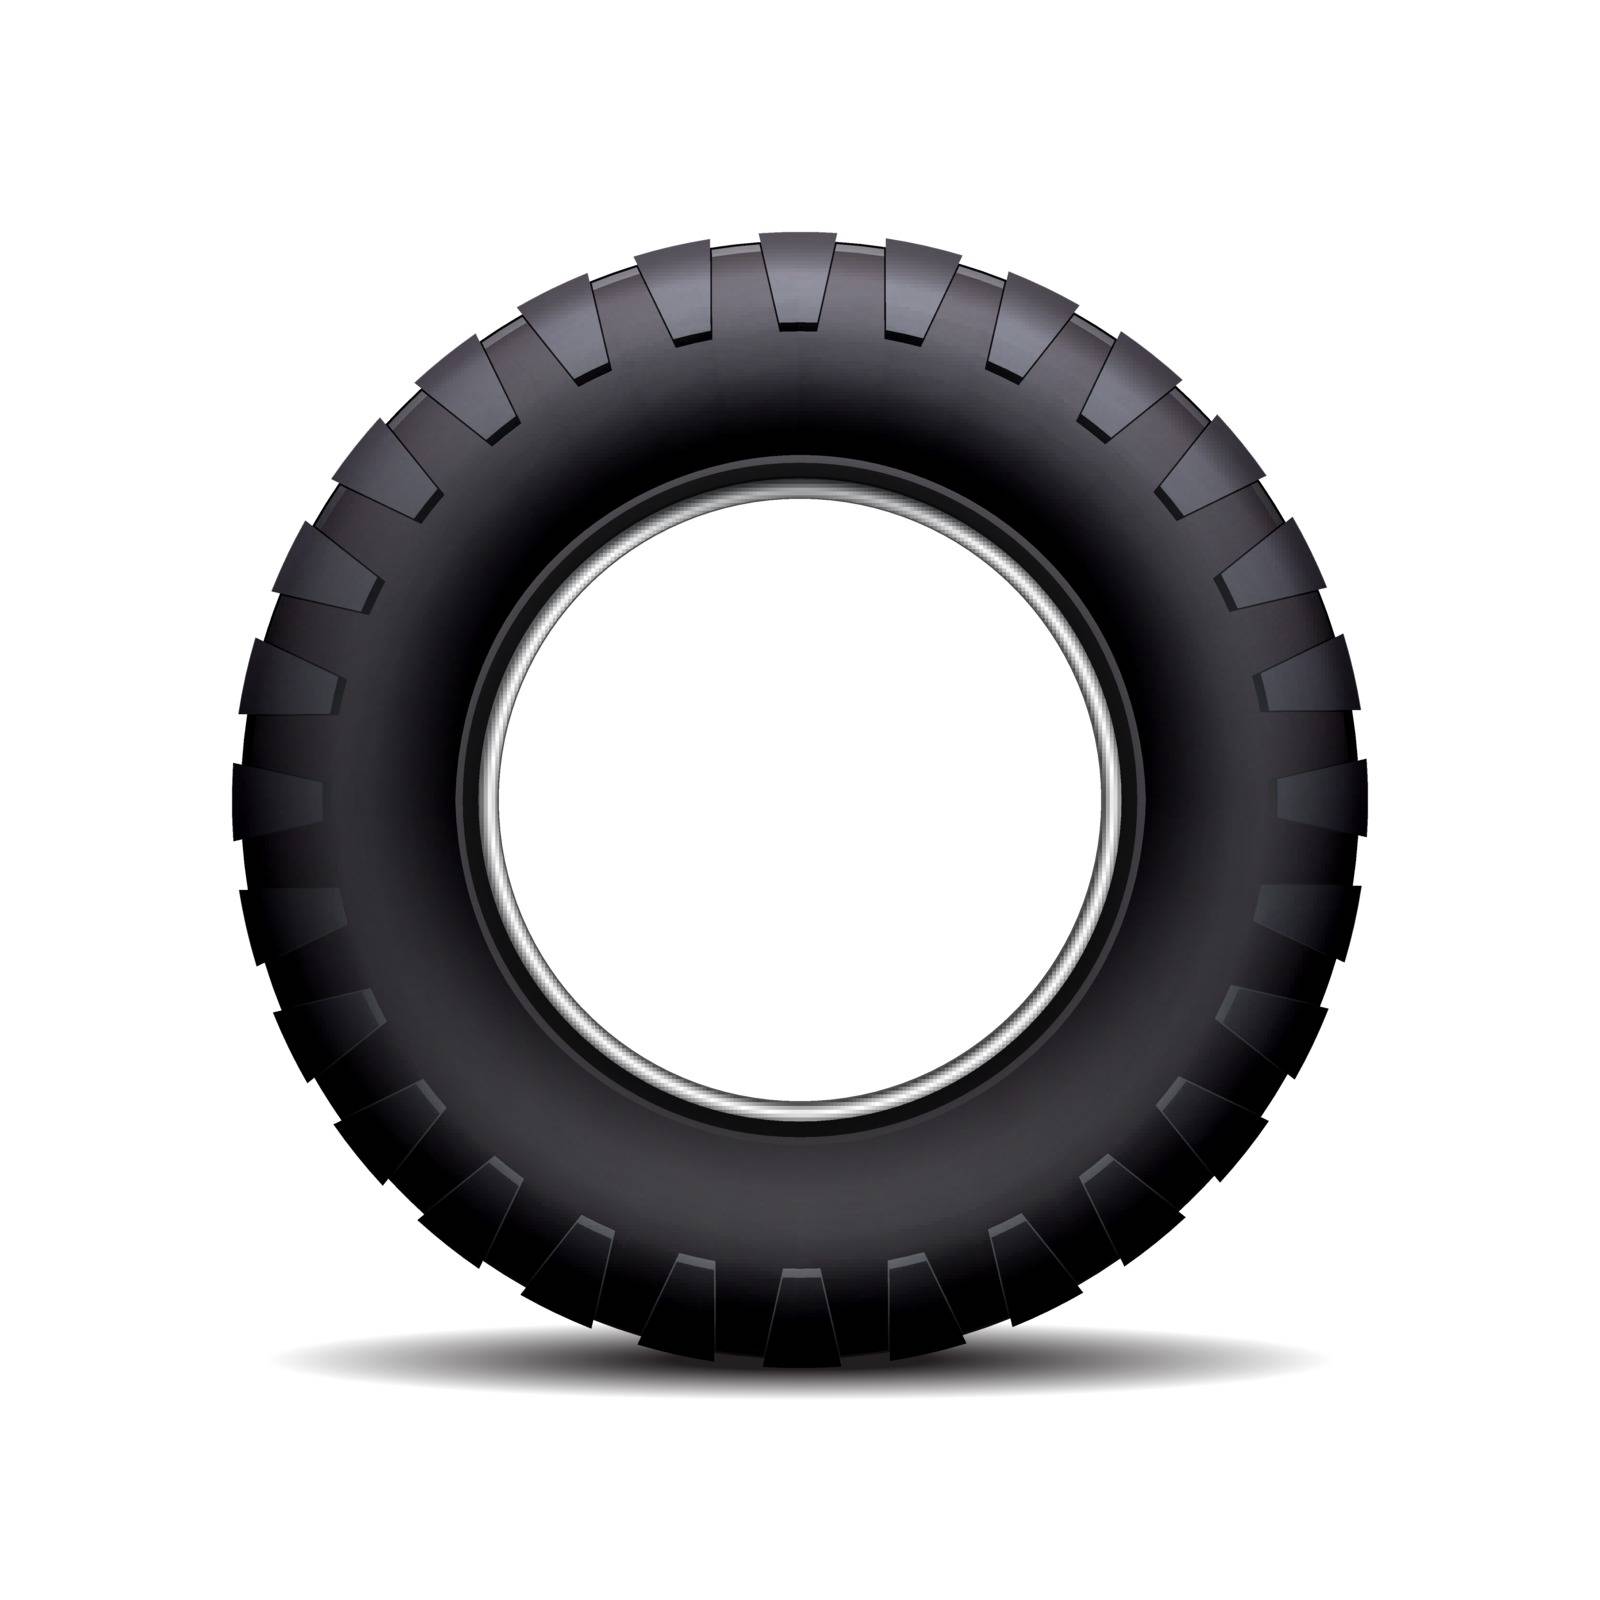 Car tire isolated on white background. Vector illustration